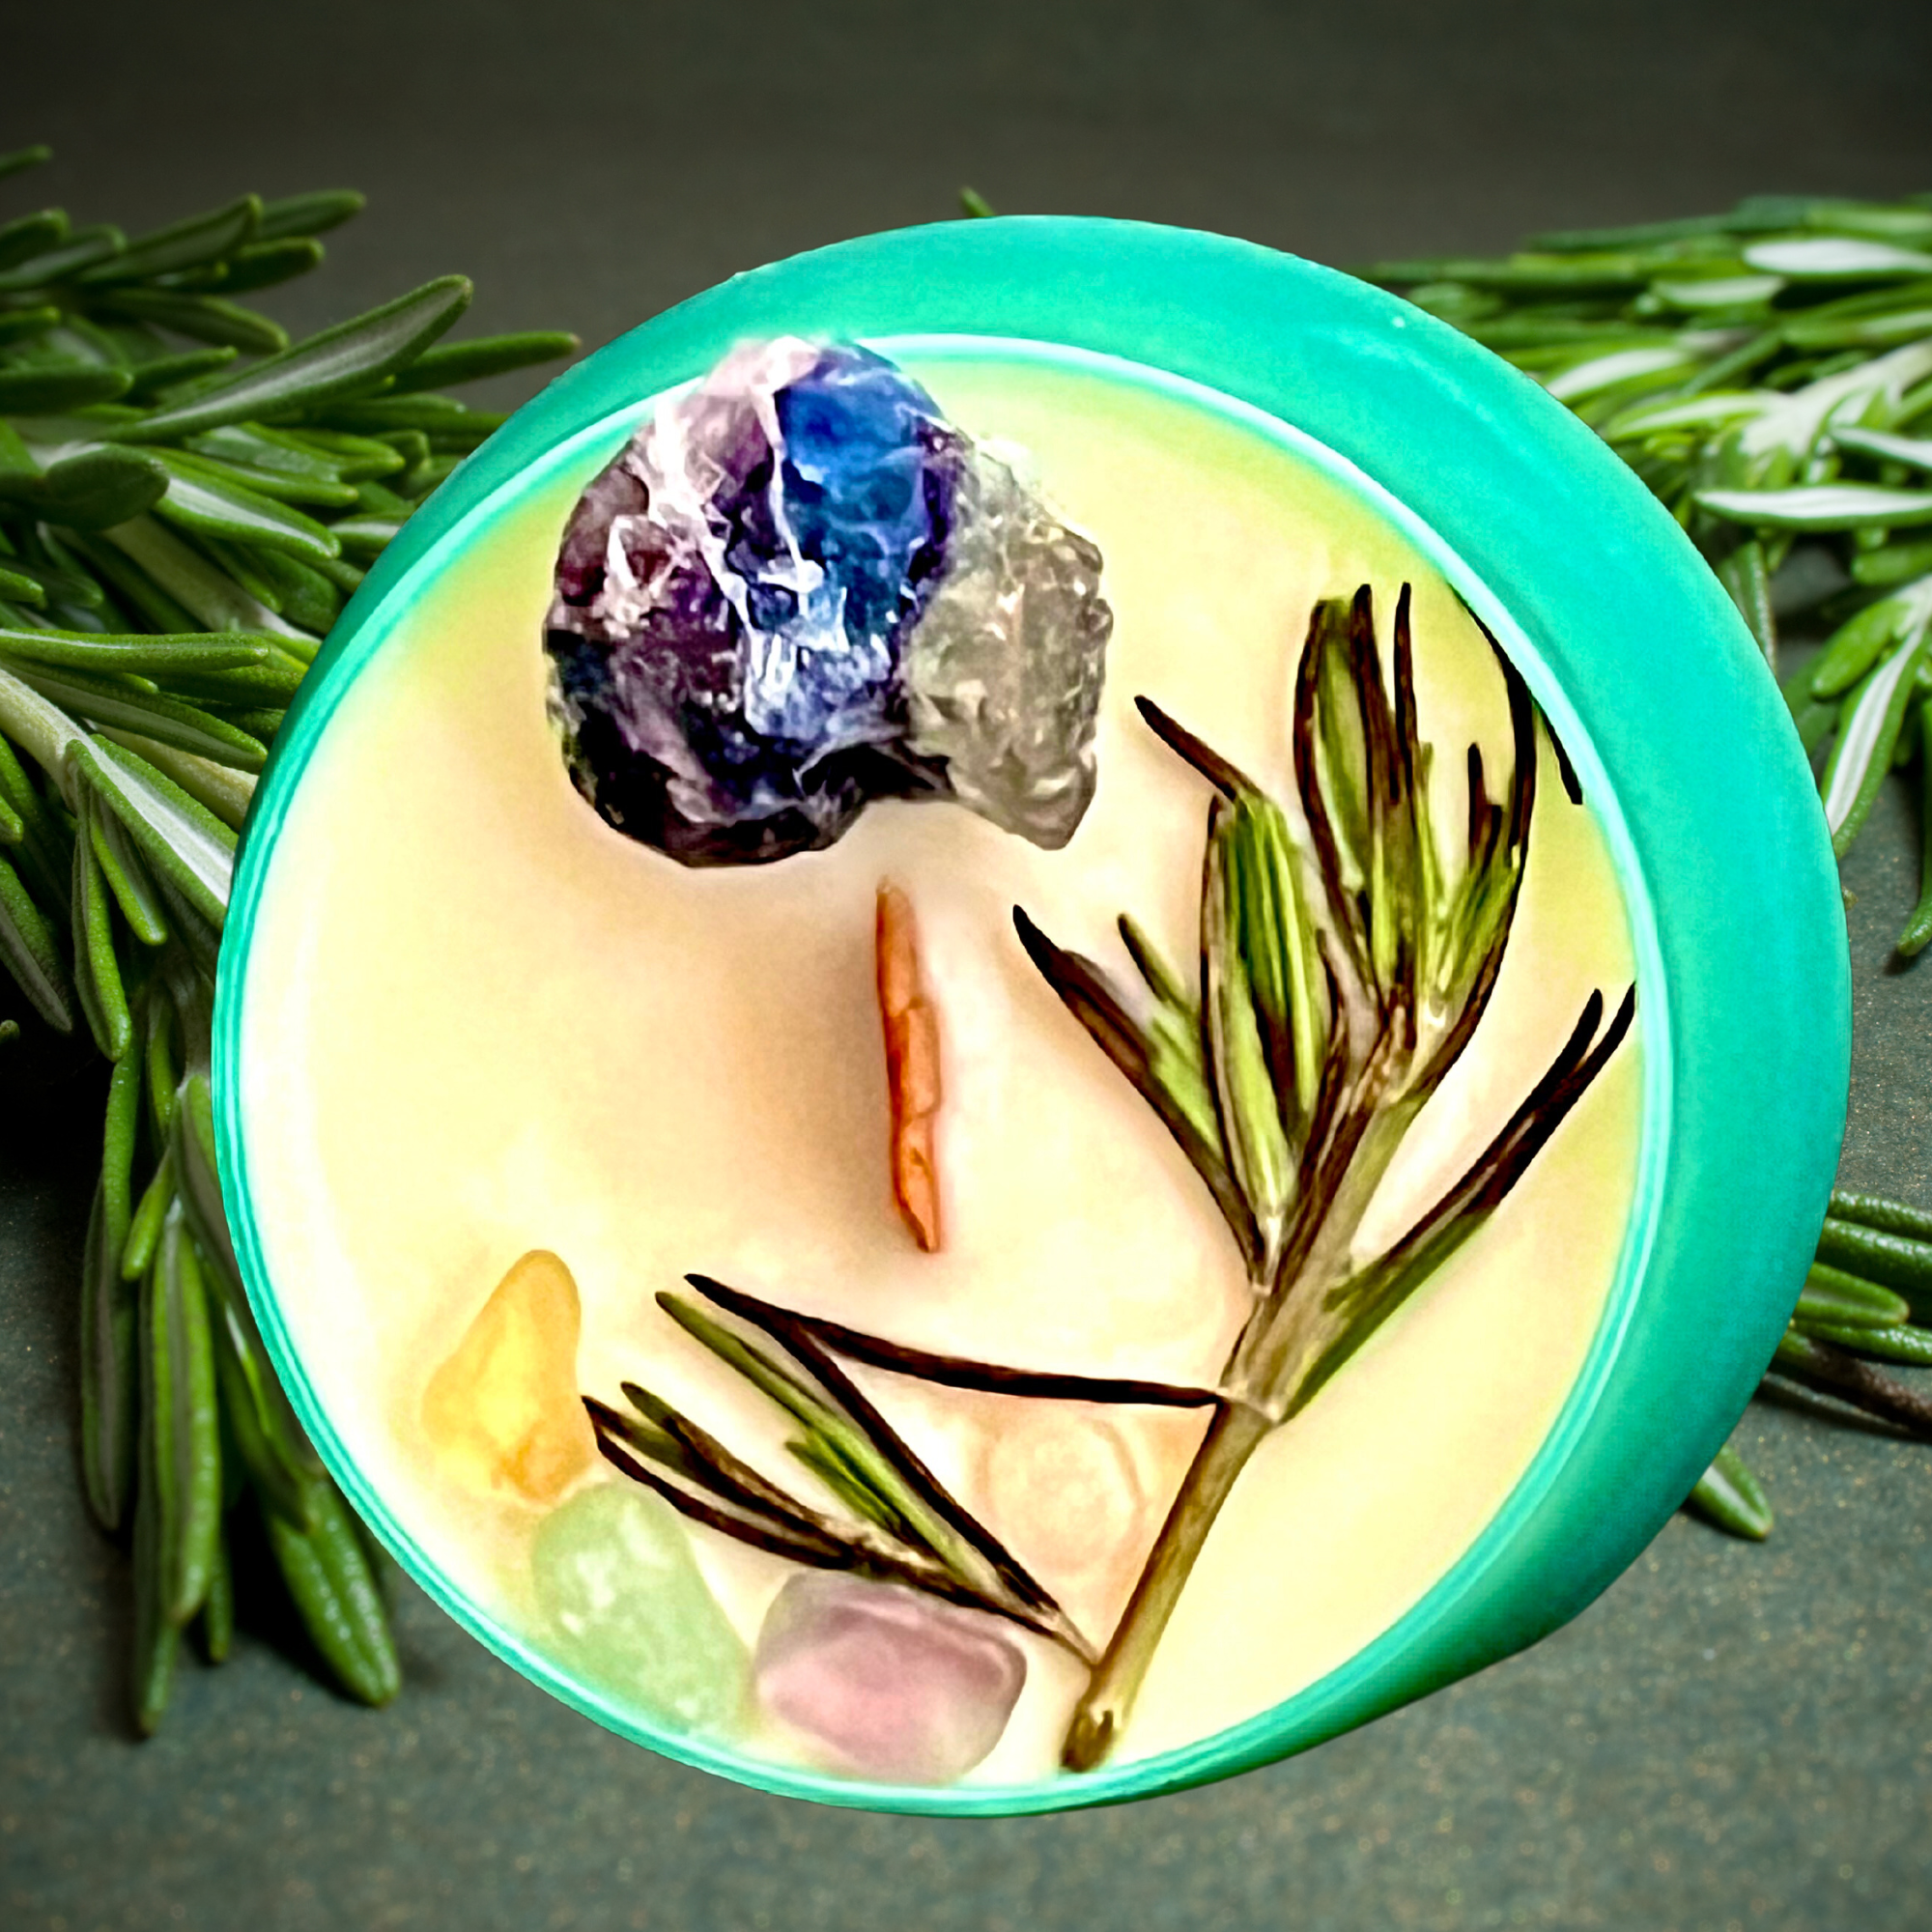 Alchemy7 | Focus - White Sage &amp; Rosemary 12 oz Intention Candle For Mental Clarity